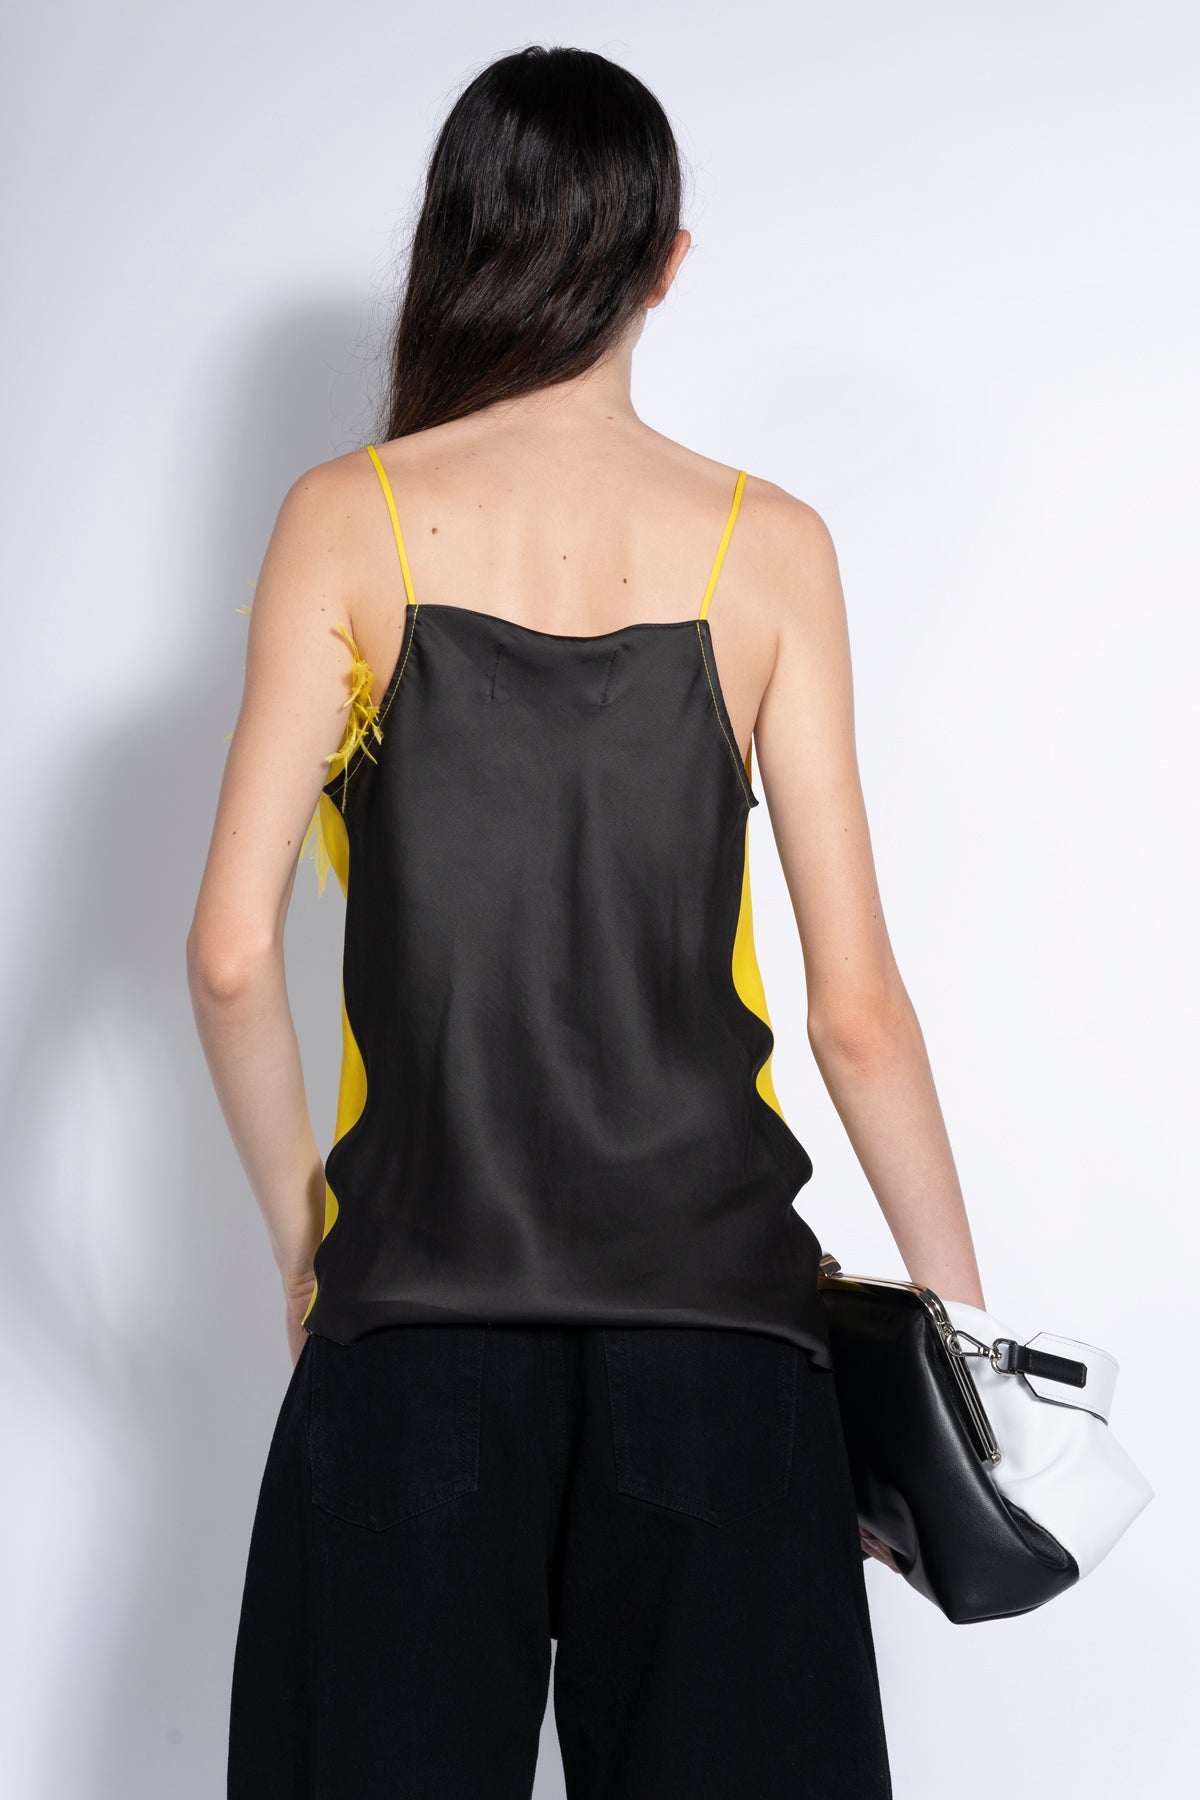 BLACK AND YELLOW FEATHER DRAPED SLIP TOP marques almeida